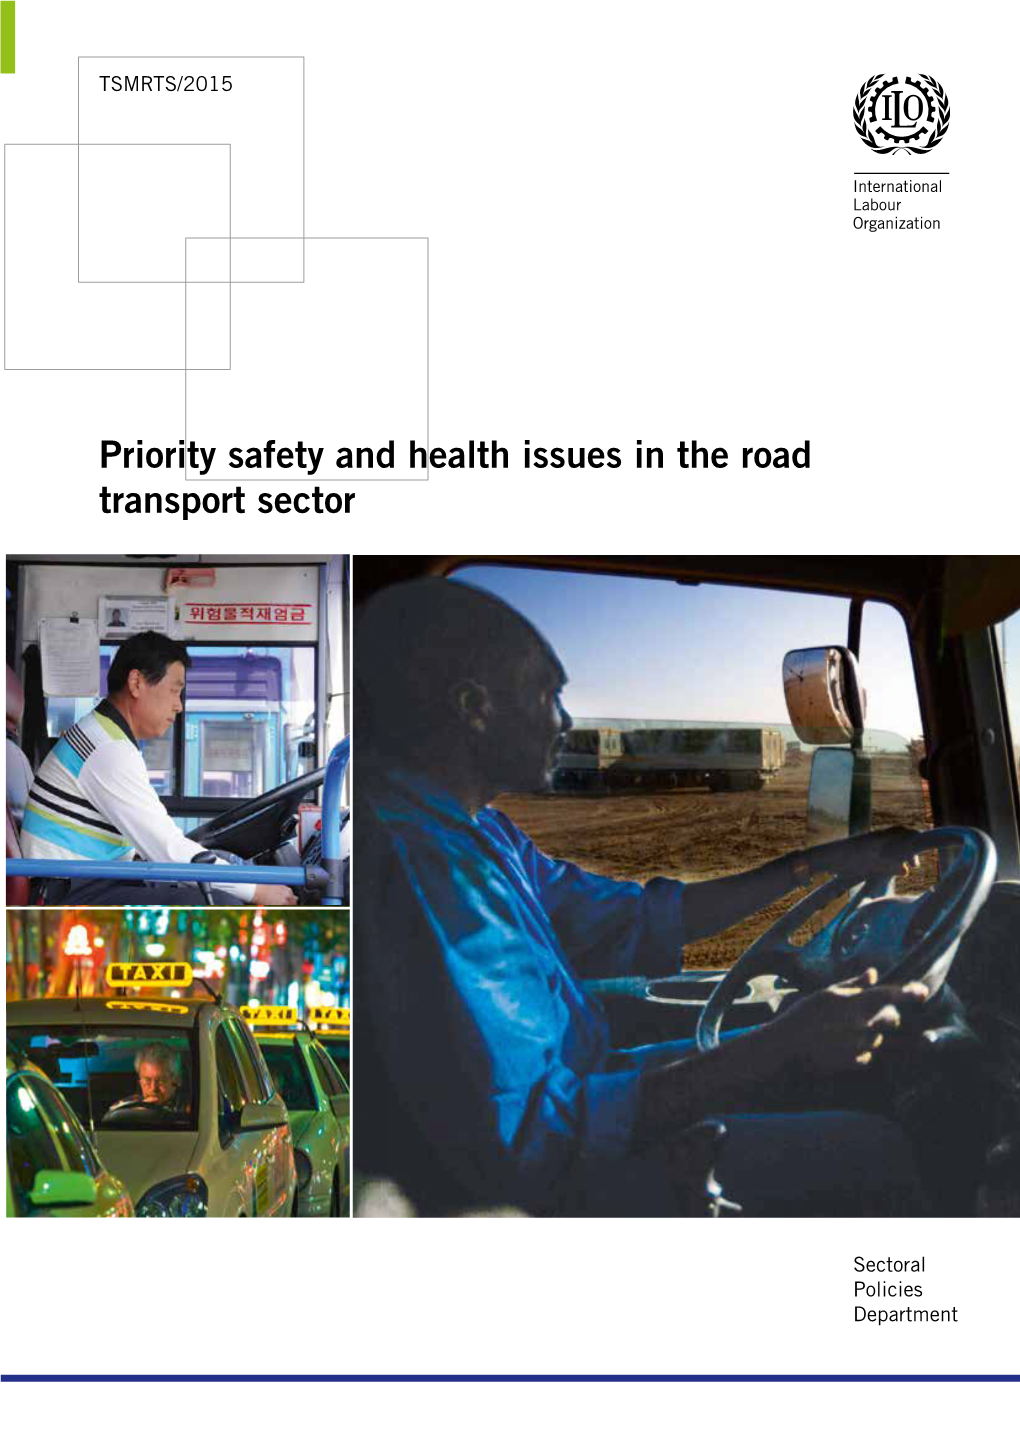 Priority Safety and Health Issues in the Road Transport Sector